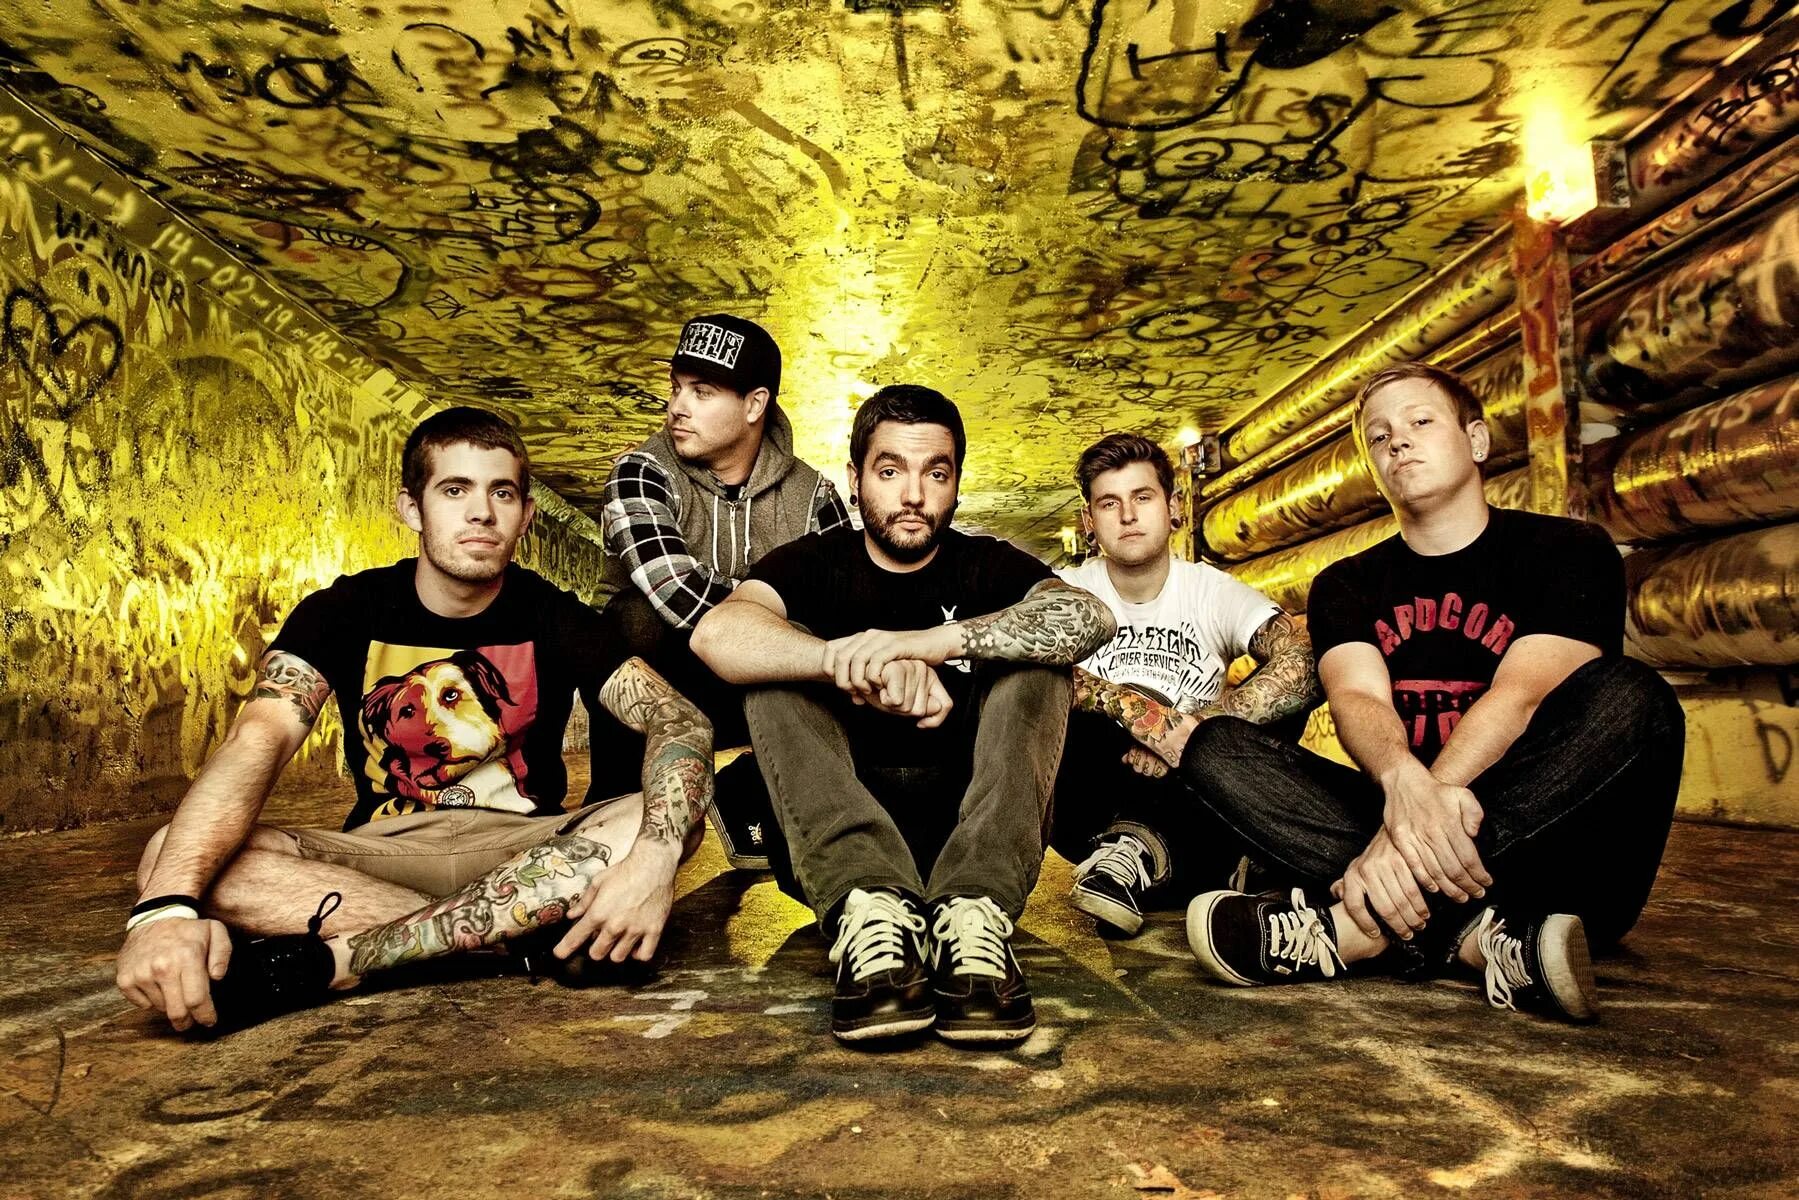 Remember music. A Day to remember. Remember группа. A Day to remember Band. Фотосессия музыкальной группы.